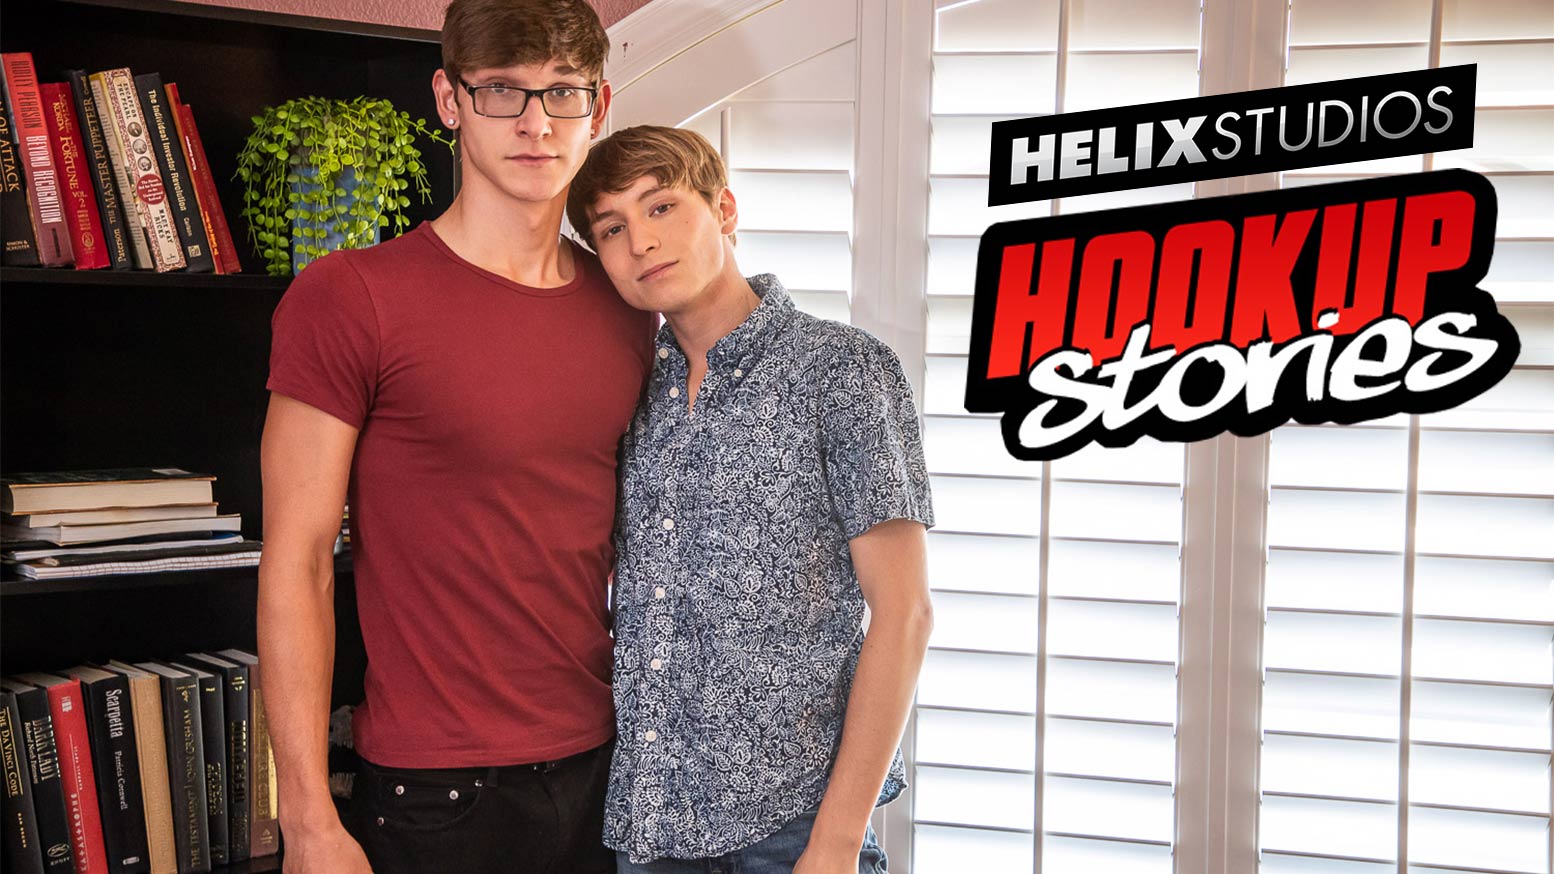 Hookup Stories: Chase & Chris